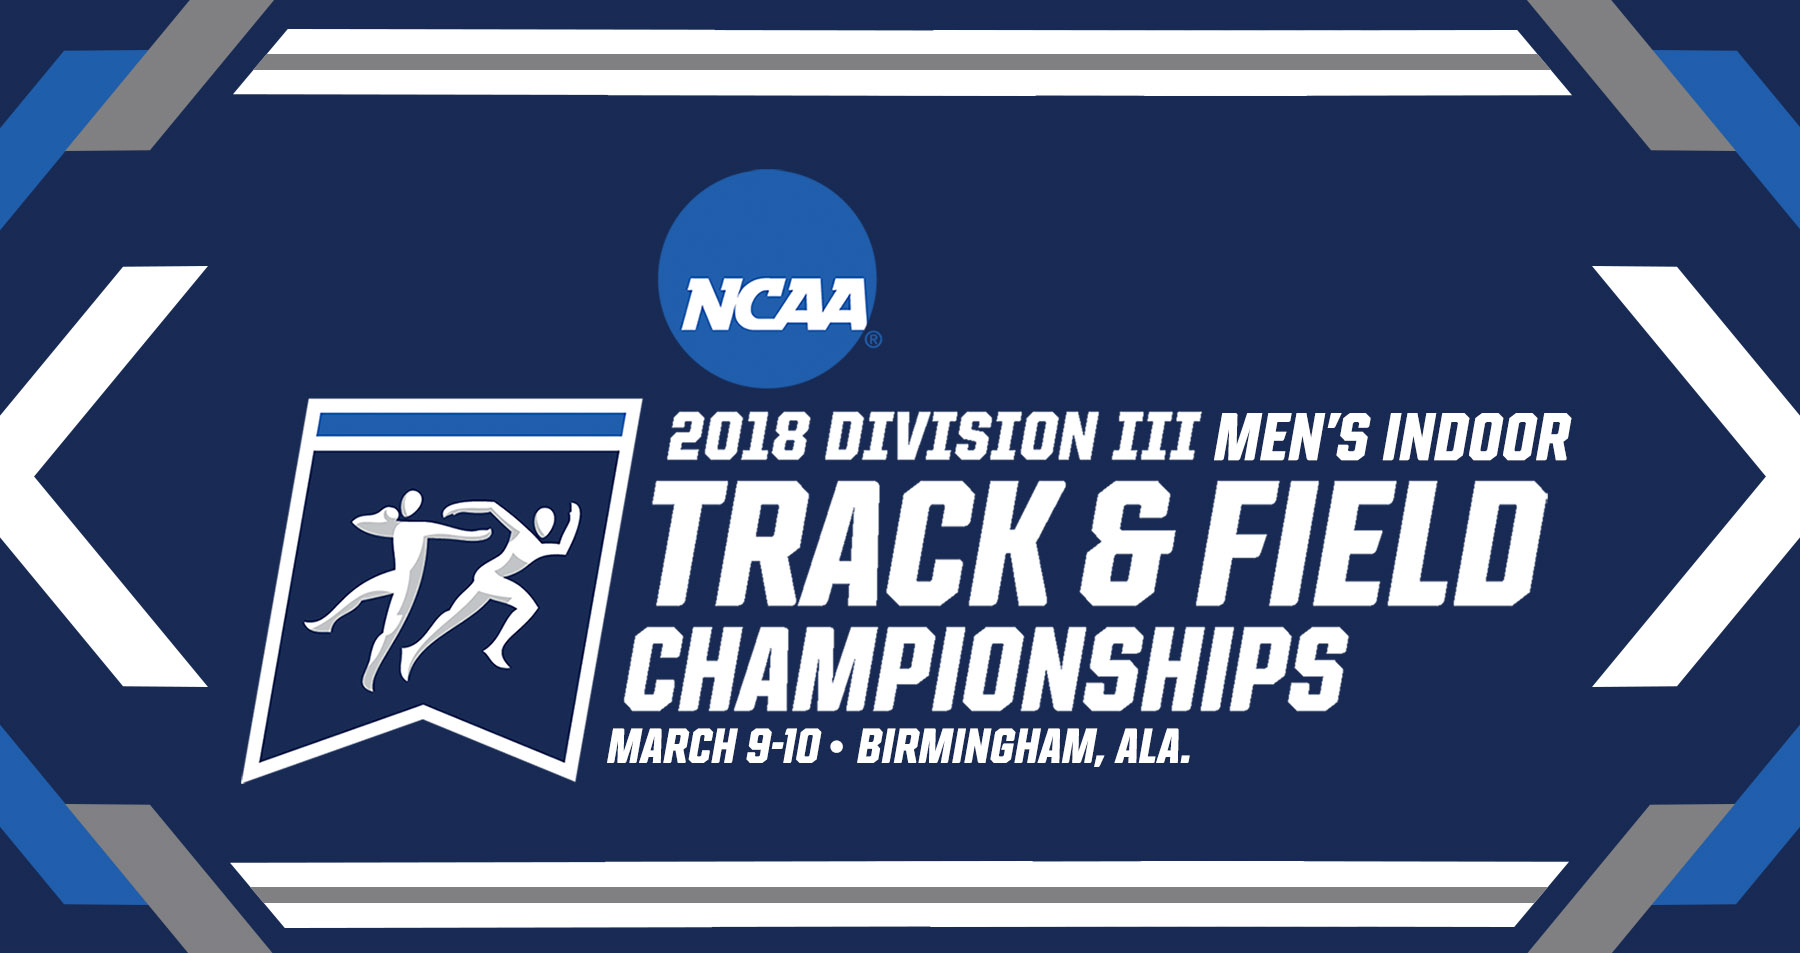 Five Titans To Participate At NCAA Men's Indoor Championships